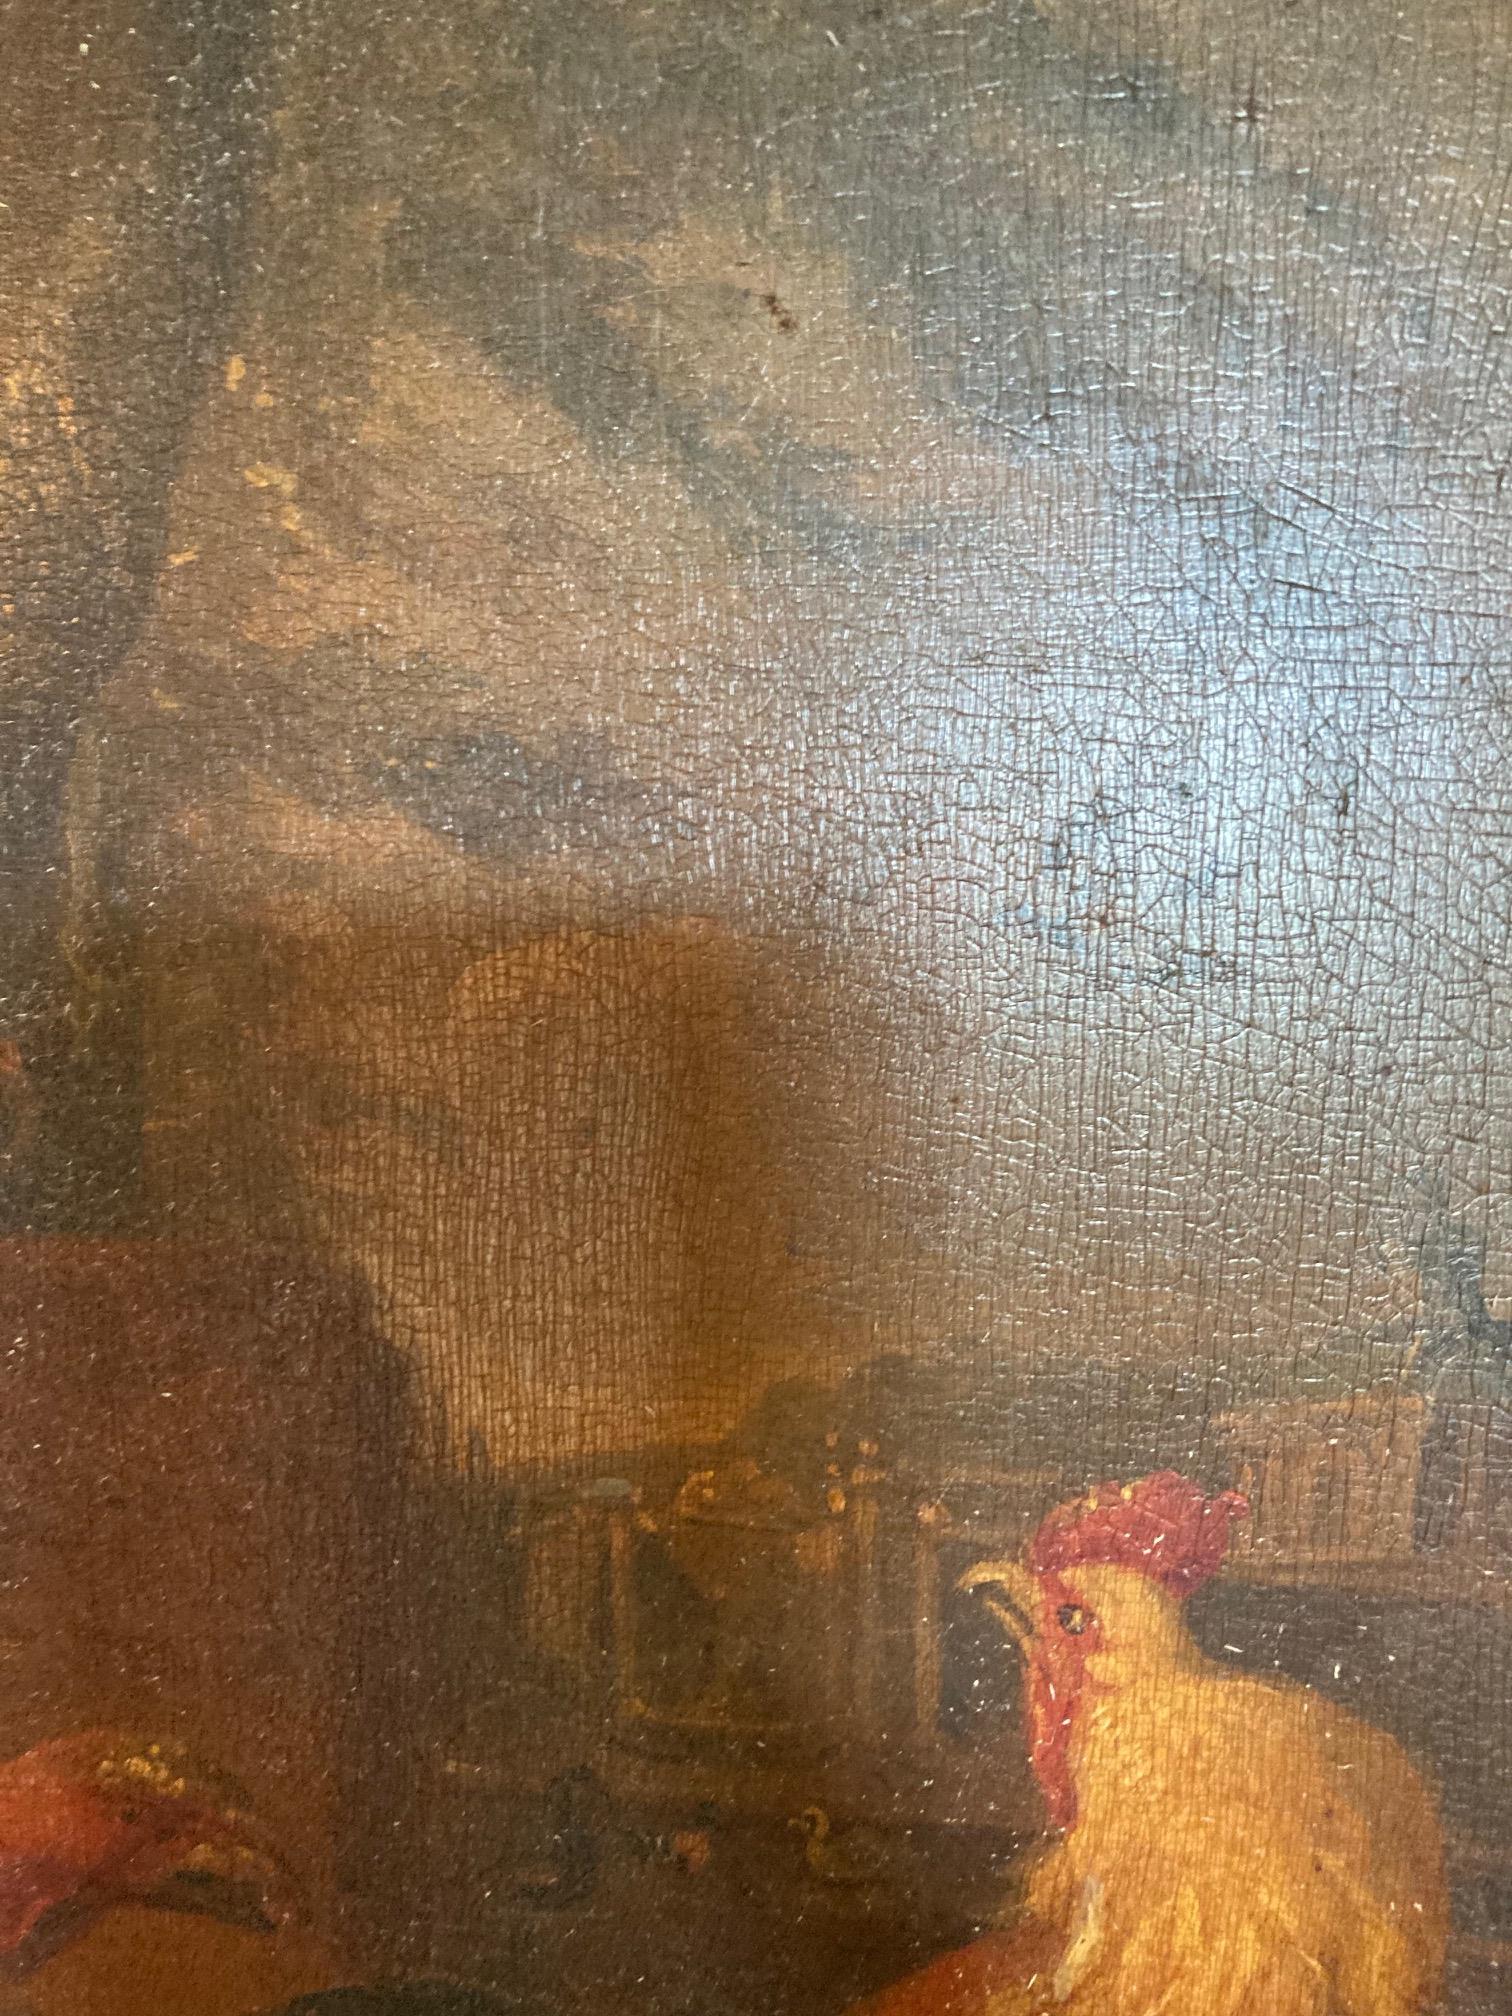 Follower of Jacob Bogdani (1660 - 1724) "Domestic and Exotic Birds near a Stately Home," and its - Image 21 of 26